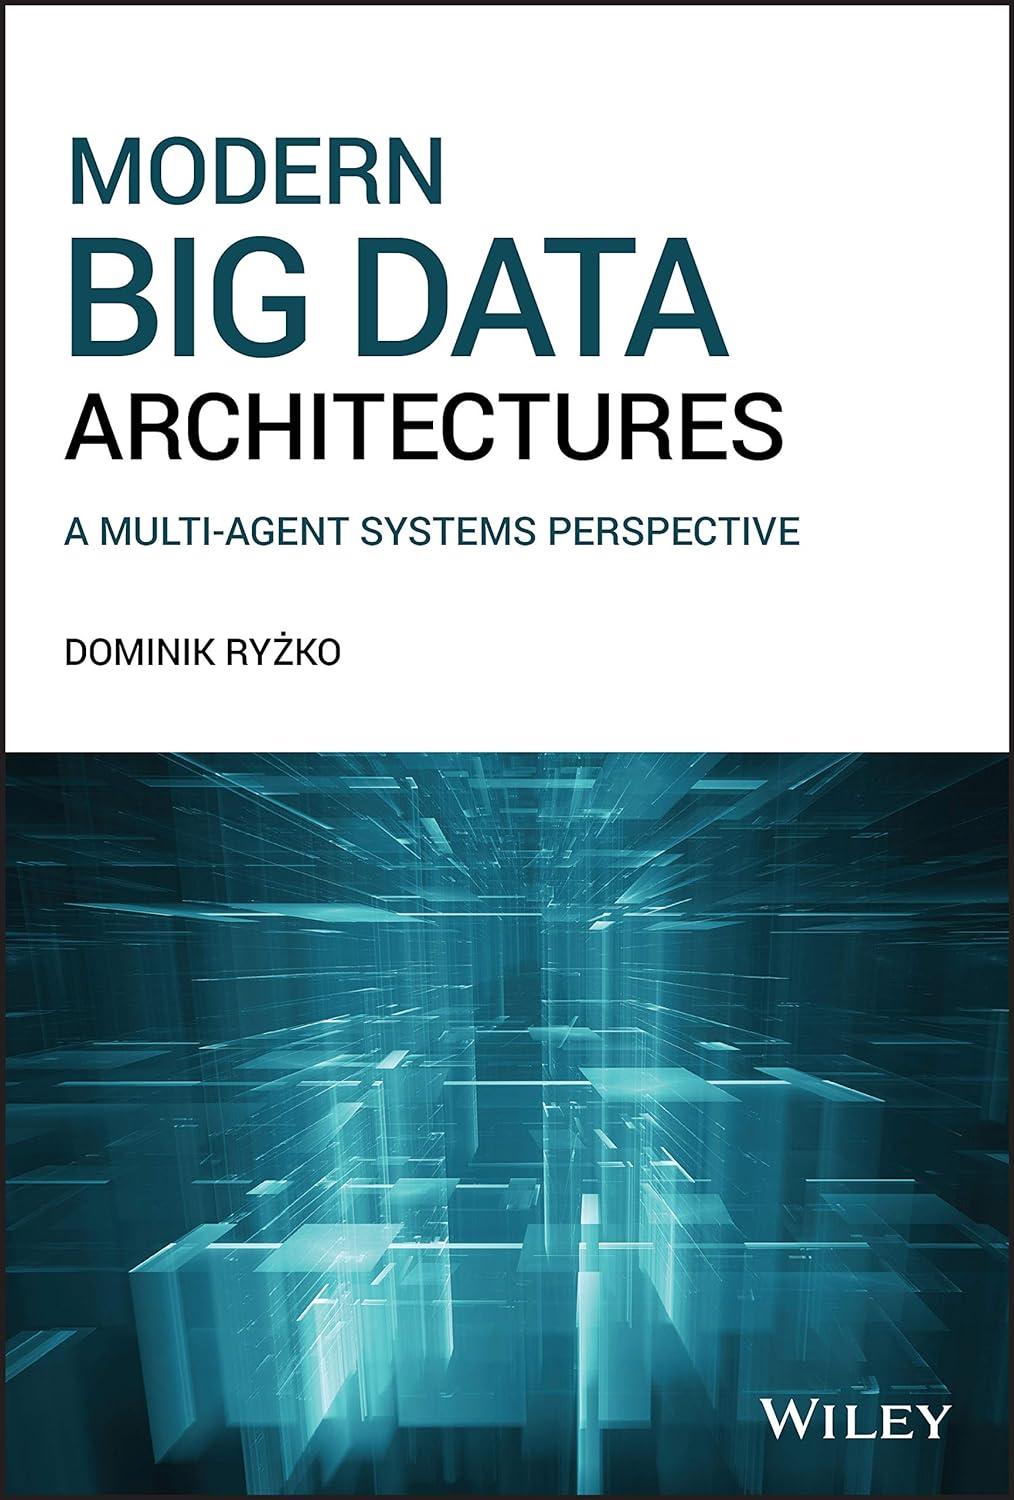 modern big data architectures a multi-agent systems perspective 1st edition dominik ryzko 1119597846,